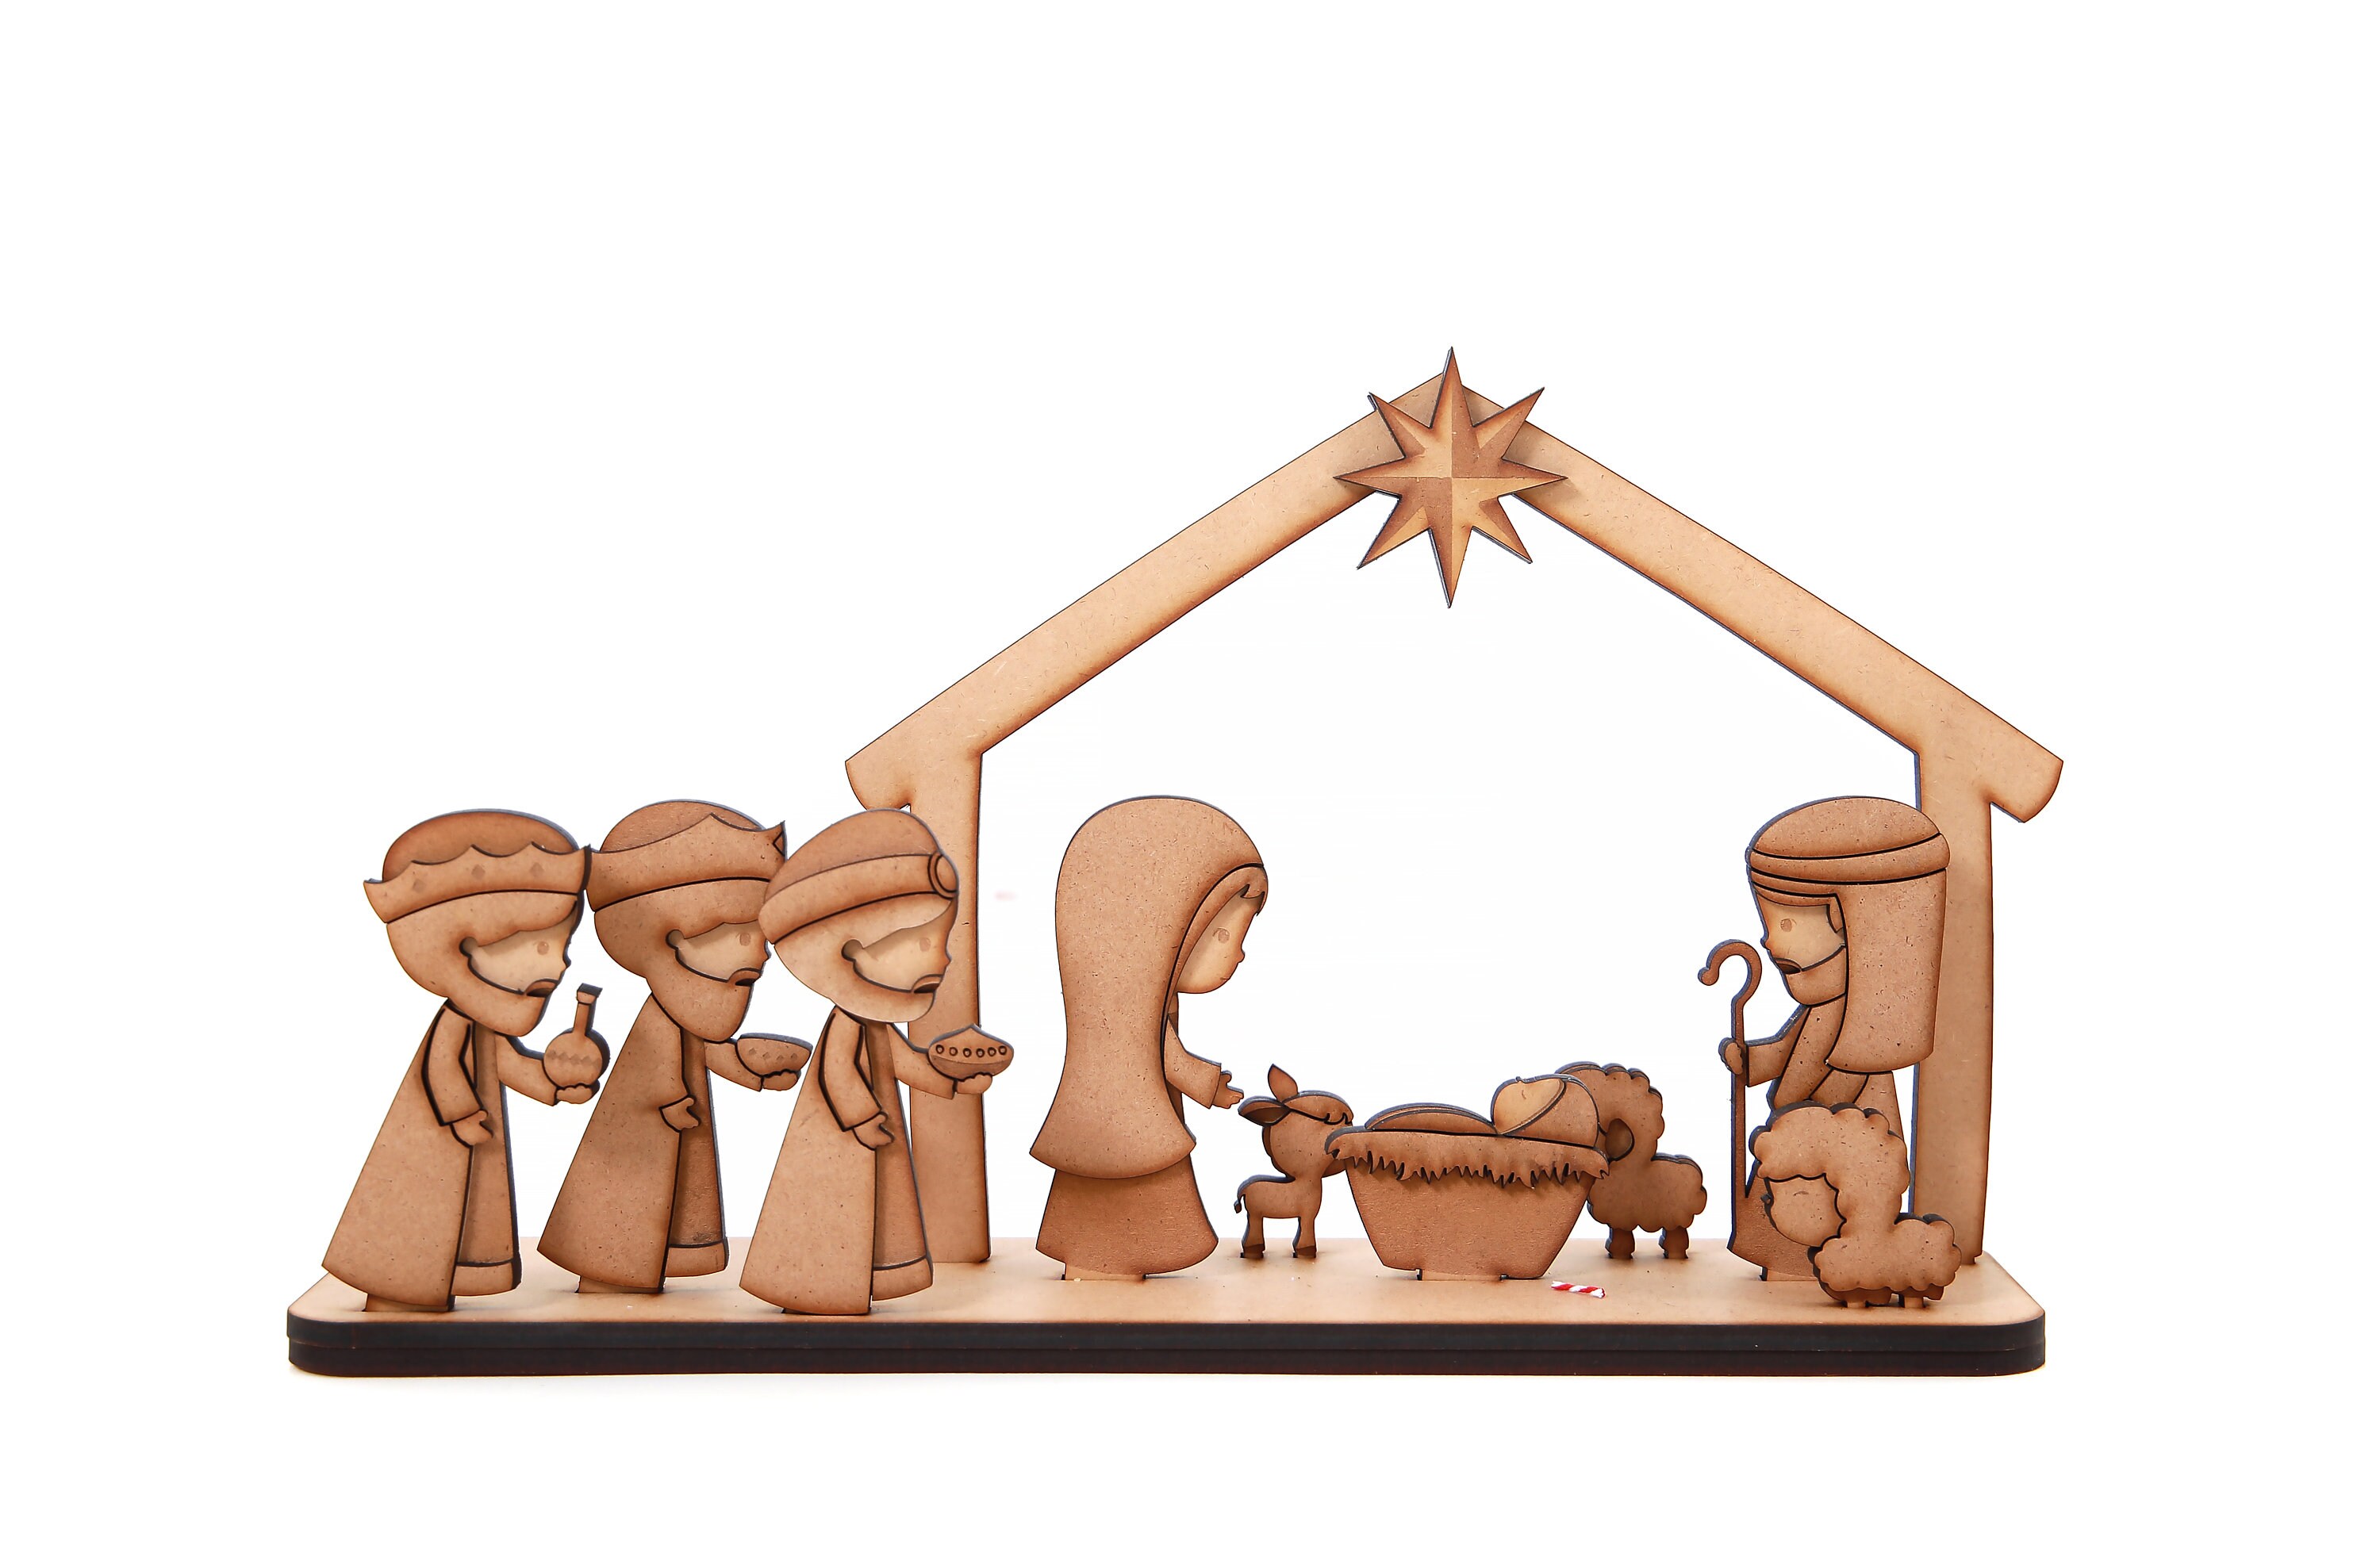 Riffelmacher 78083 Nativity Scene Figures Christmas and Decoration Pack of 10 Multi-Coloured 